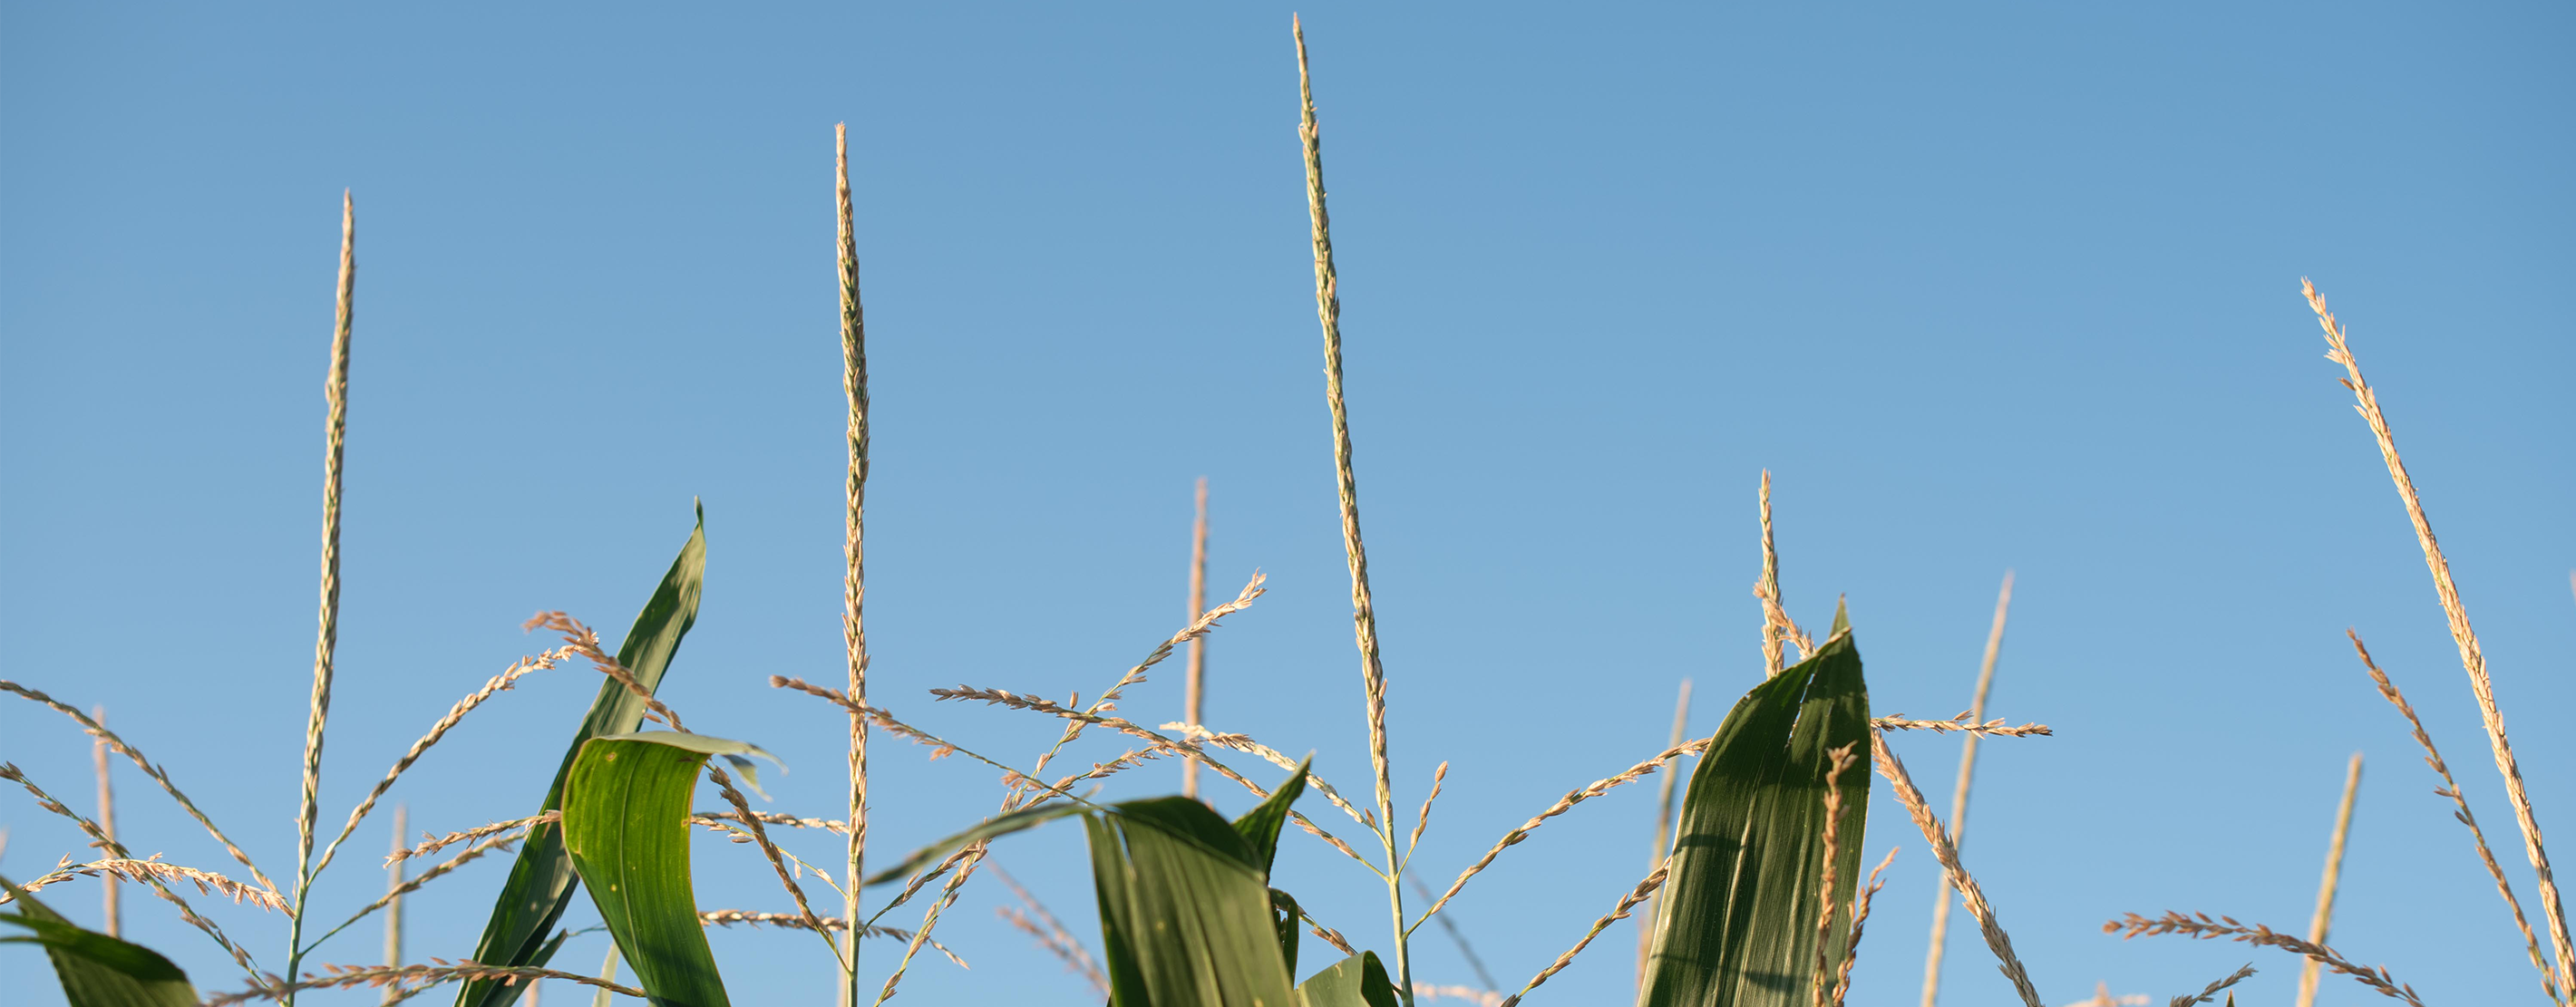 The Tops Of Corn Stalks In A SUSTAIN Field